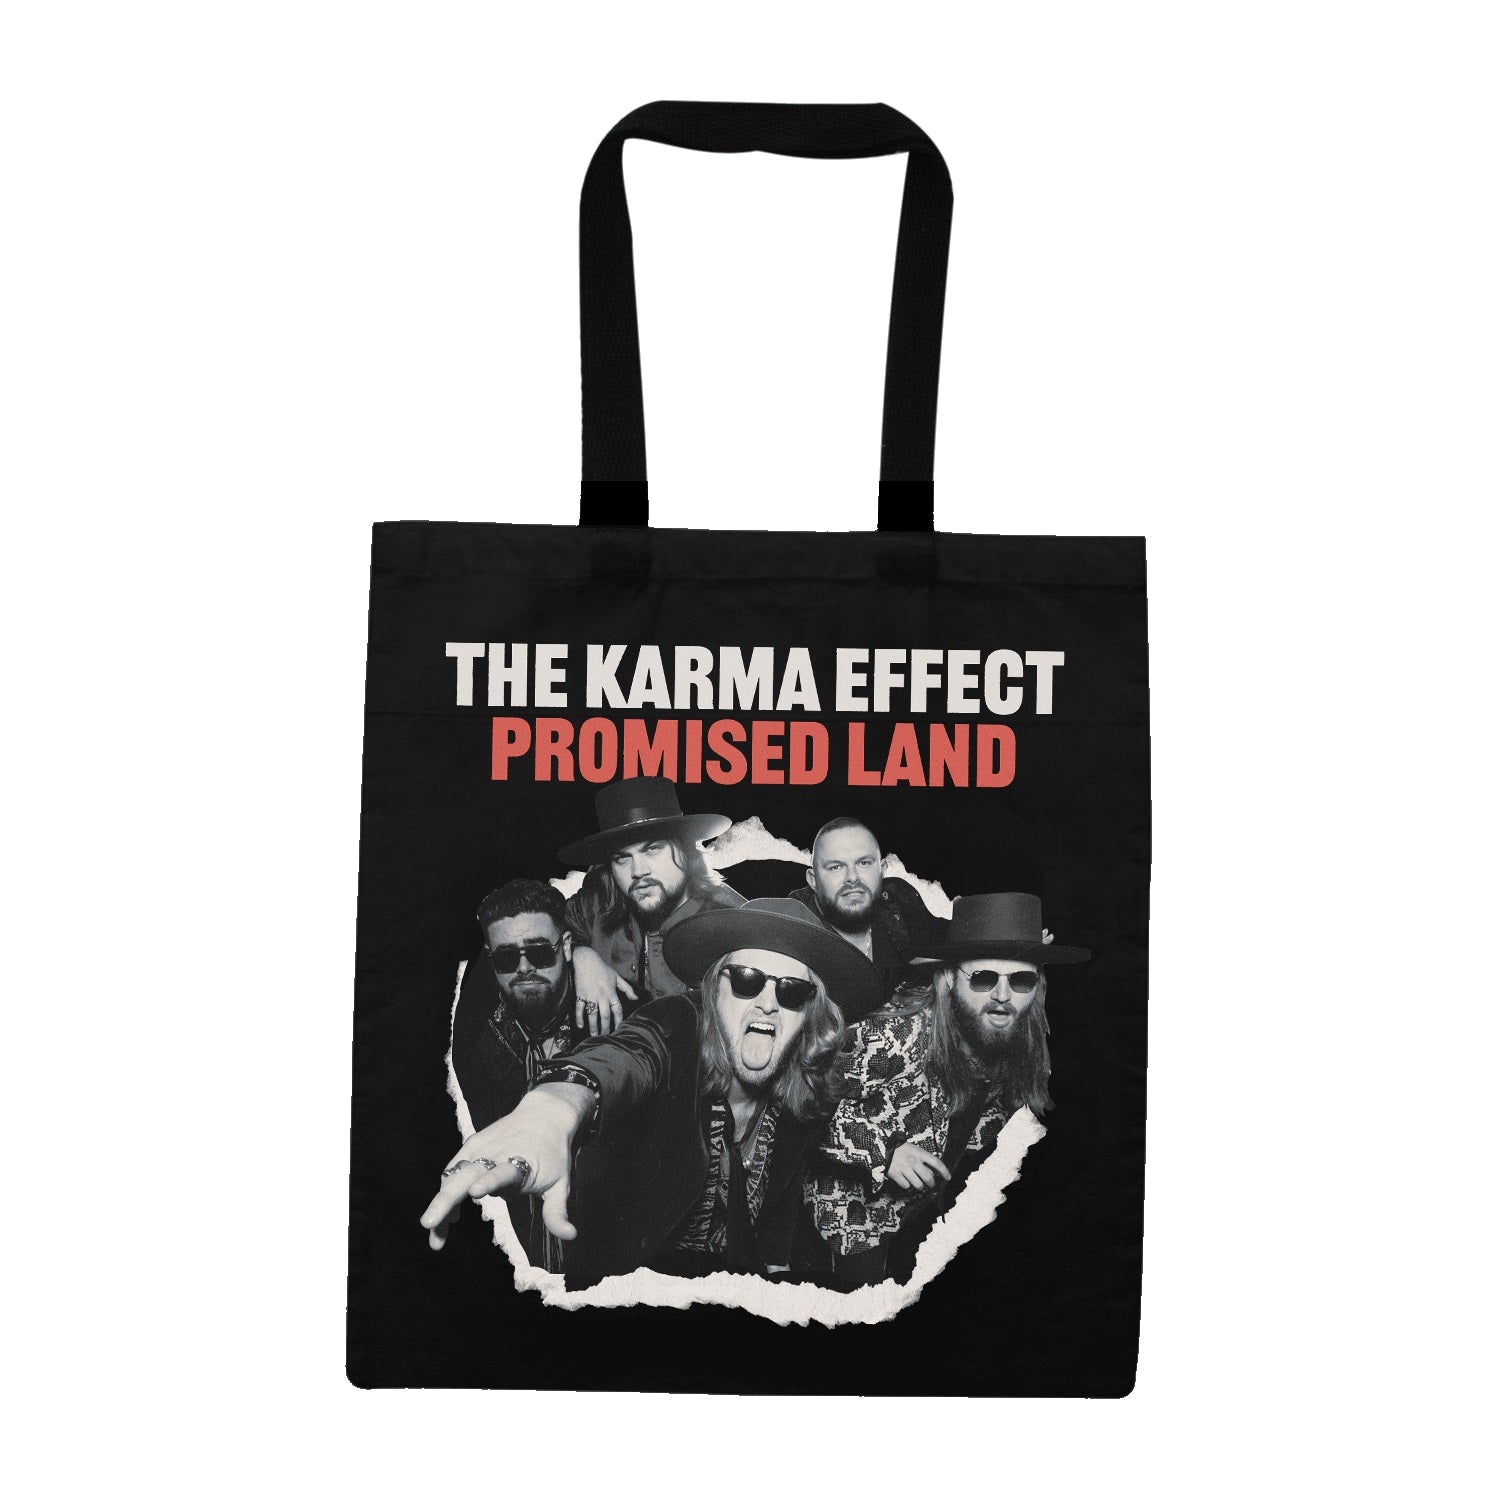 The Karma Effect "Promised Land" Tote Bag